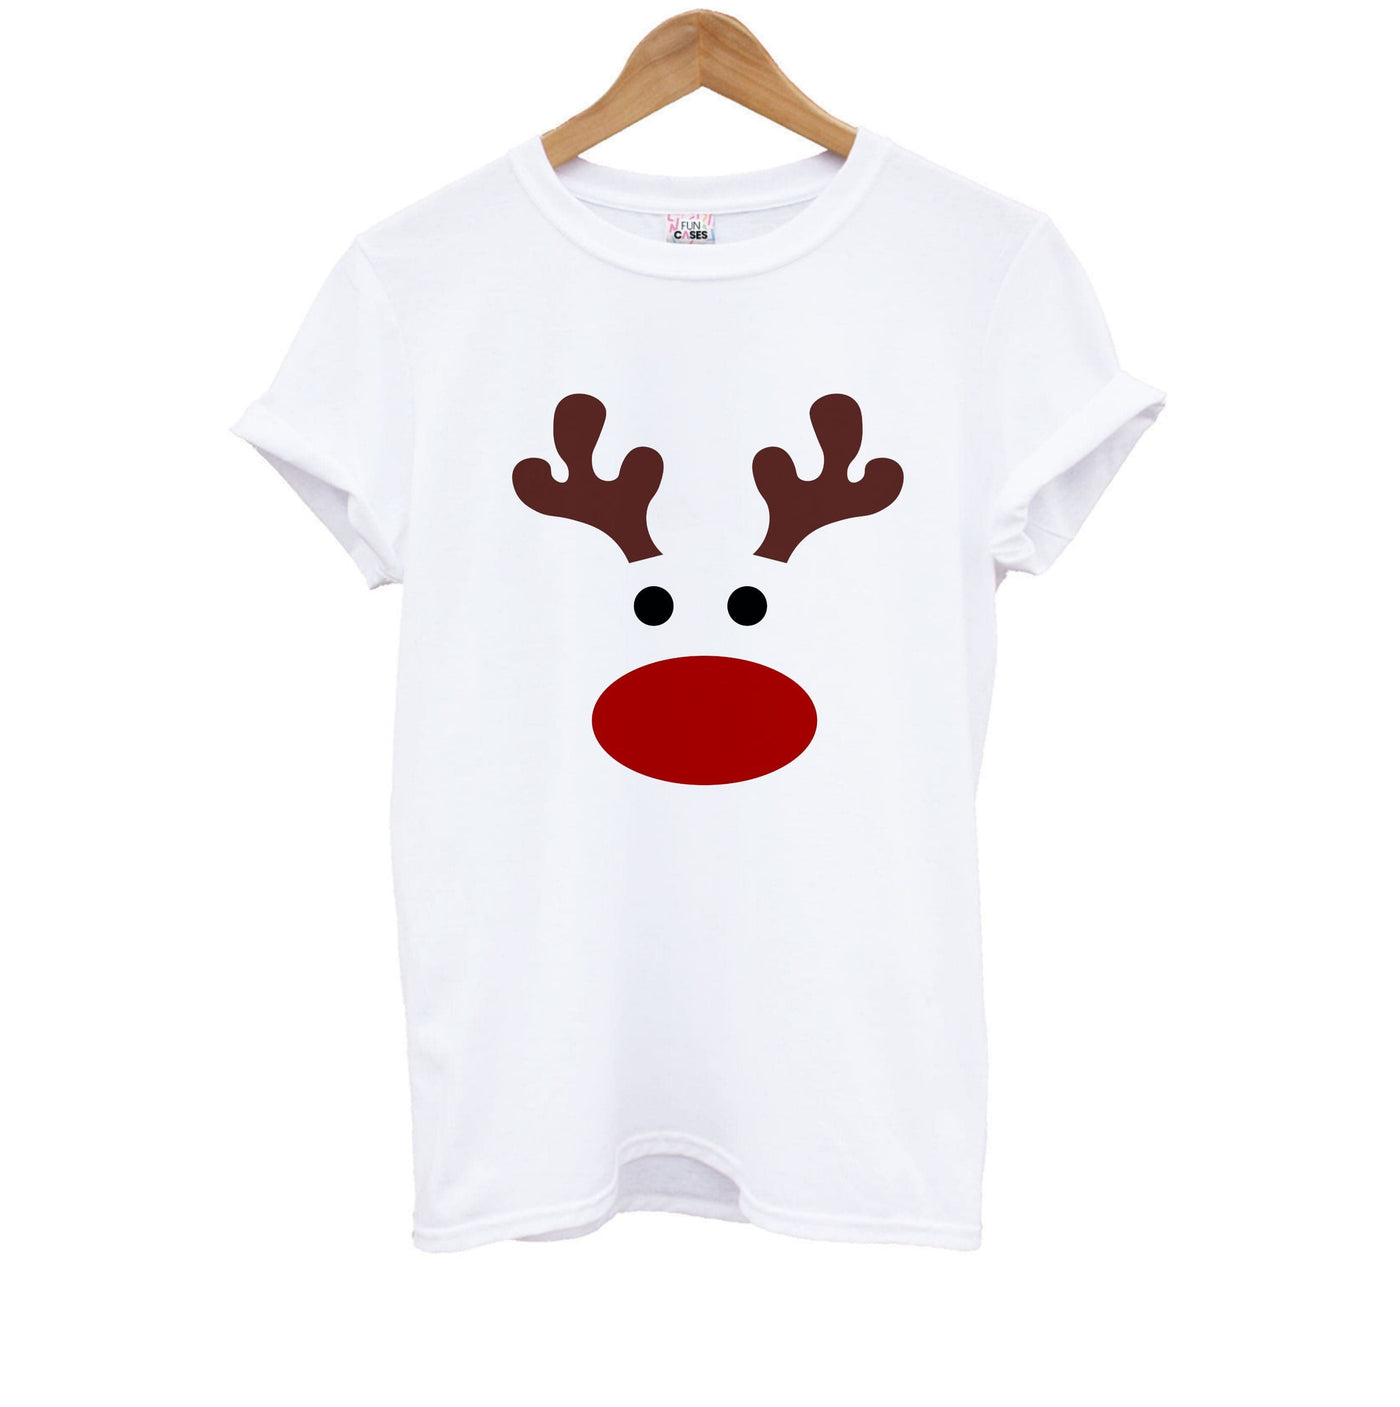 Rudolph Red Nose - Christmas Kids T-Shirt